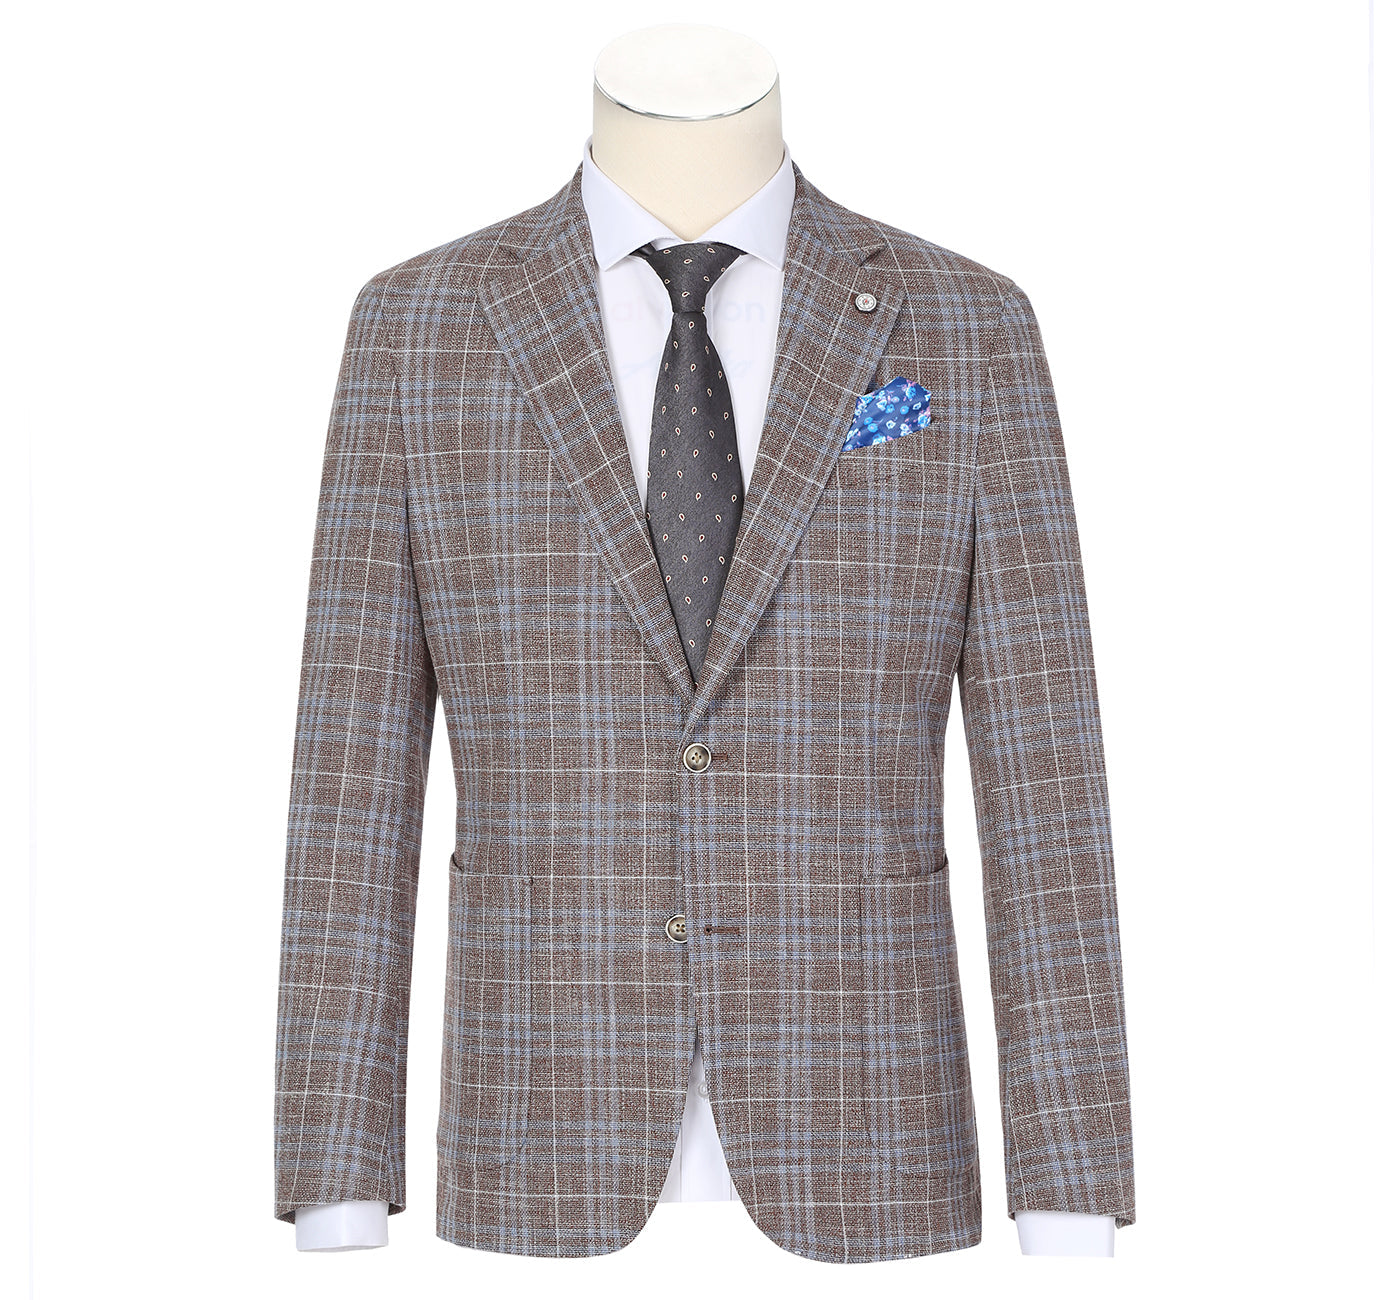 Single Breasted SLIM FIT Half Canvas Cotton/Linen Soft Jacket in Brown and Blue Plaid (Short and Regular Available) by Pelago